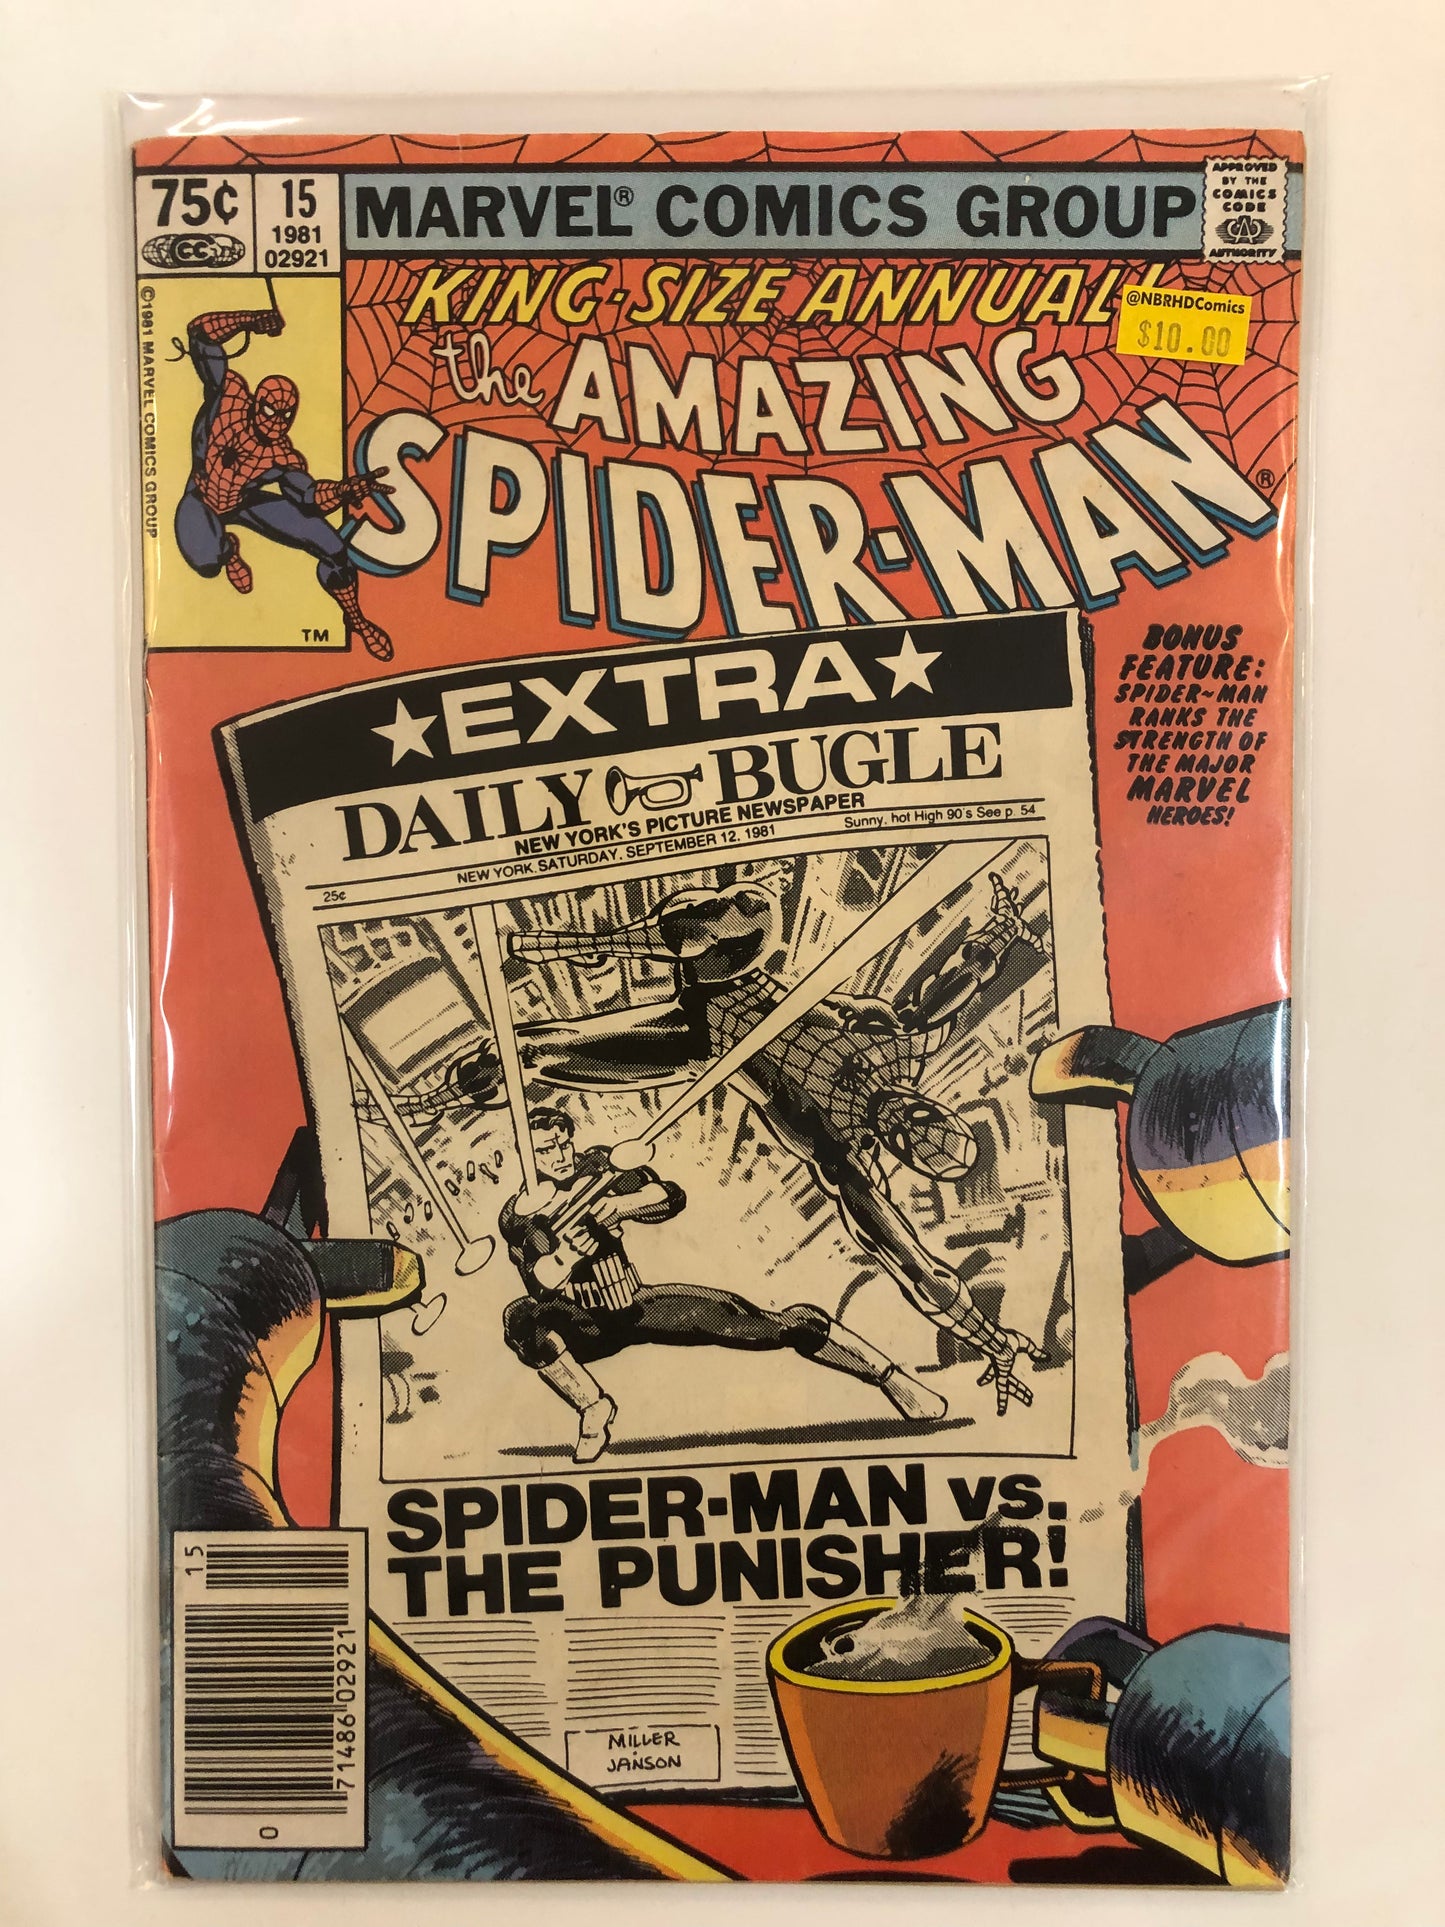 The Amazing Spider-Man Annual #15